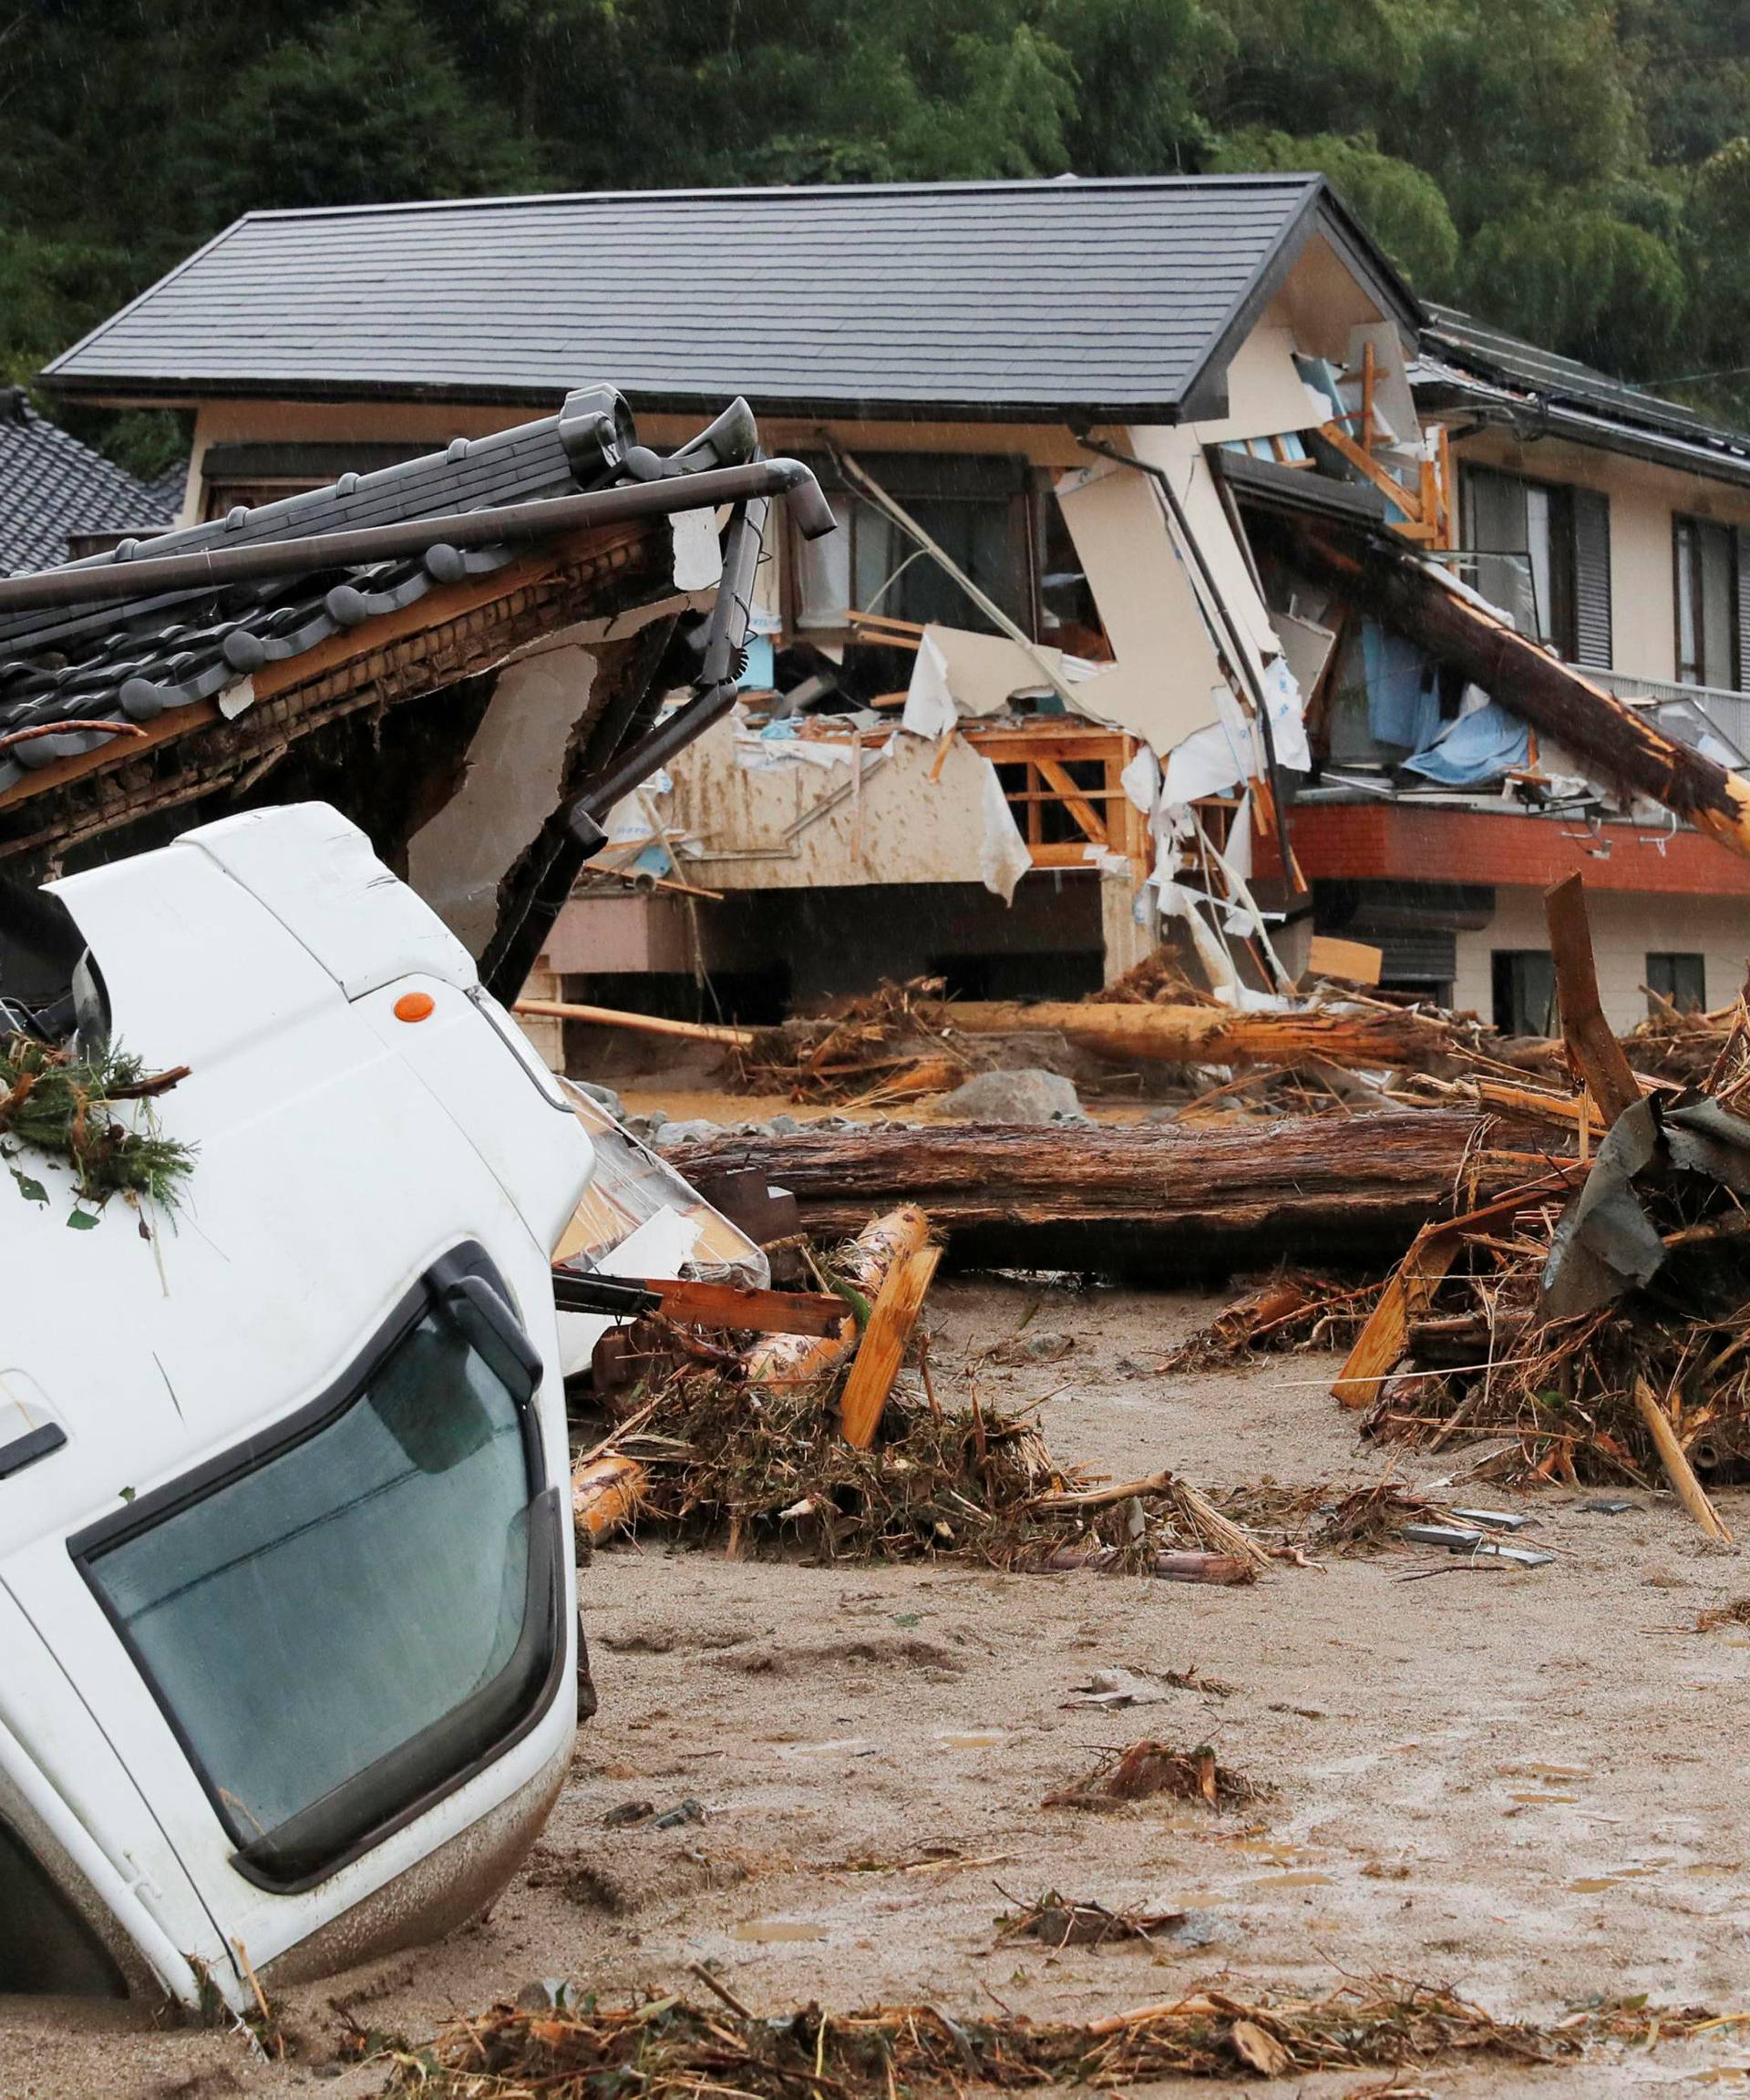 Houses and a vehicle are damaged by a swollen river after heavy rain hit the area in Asakura